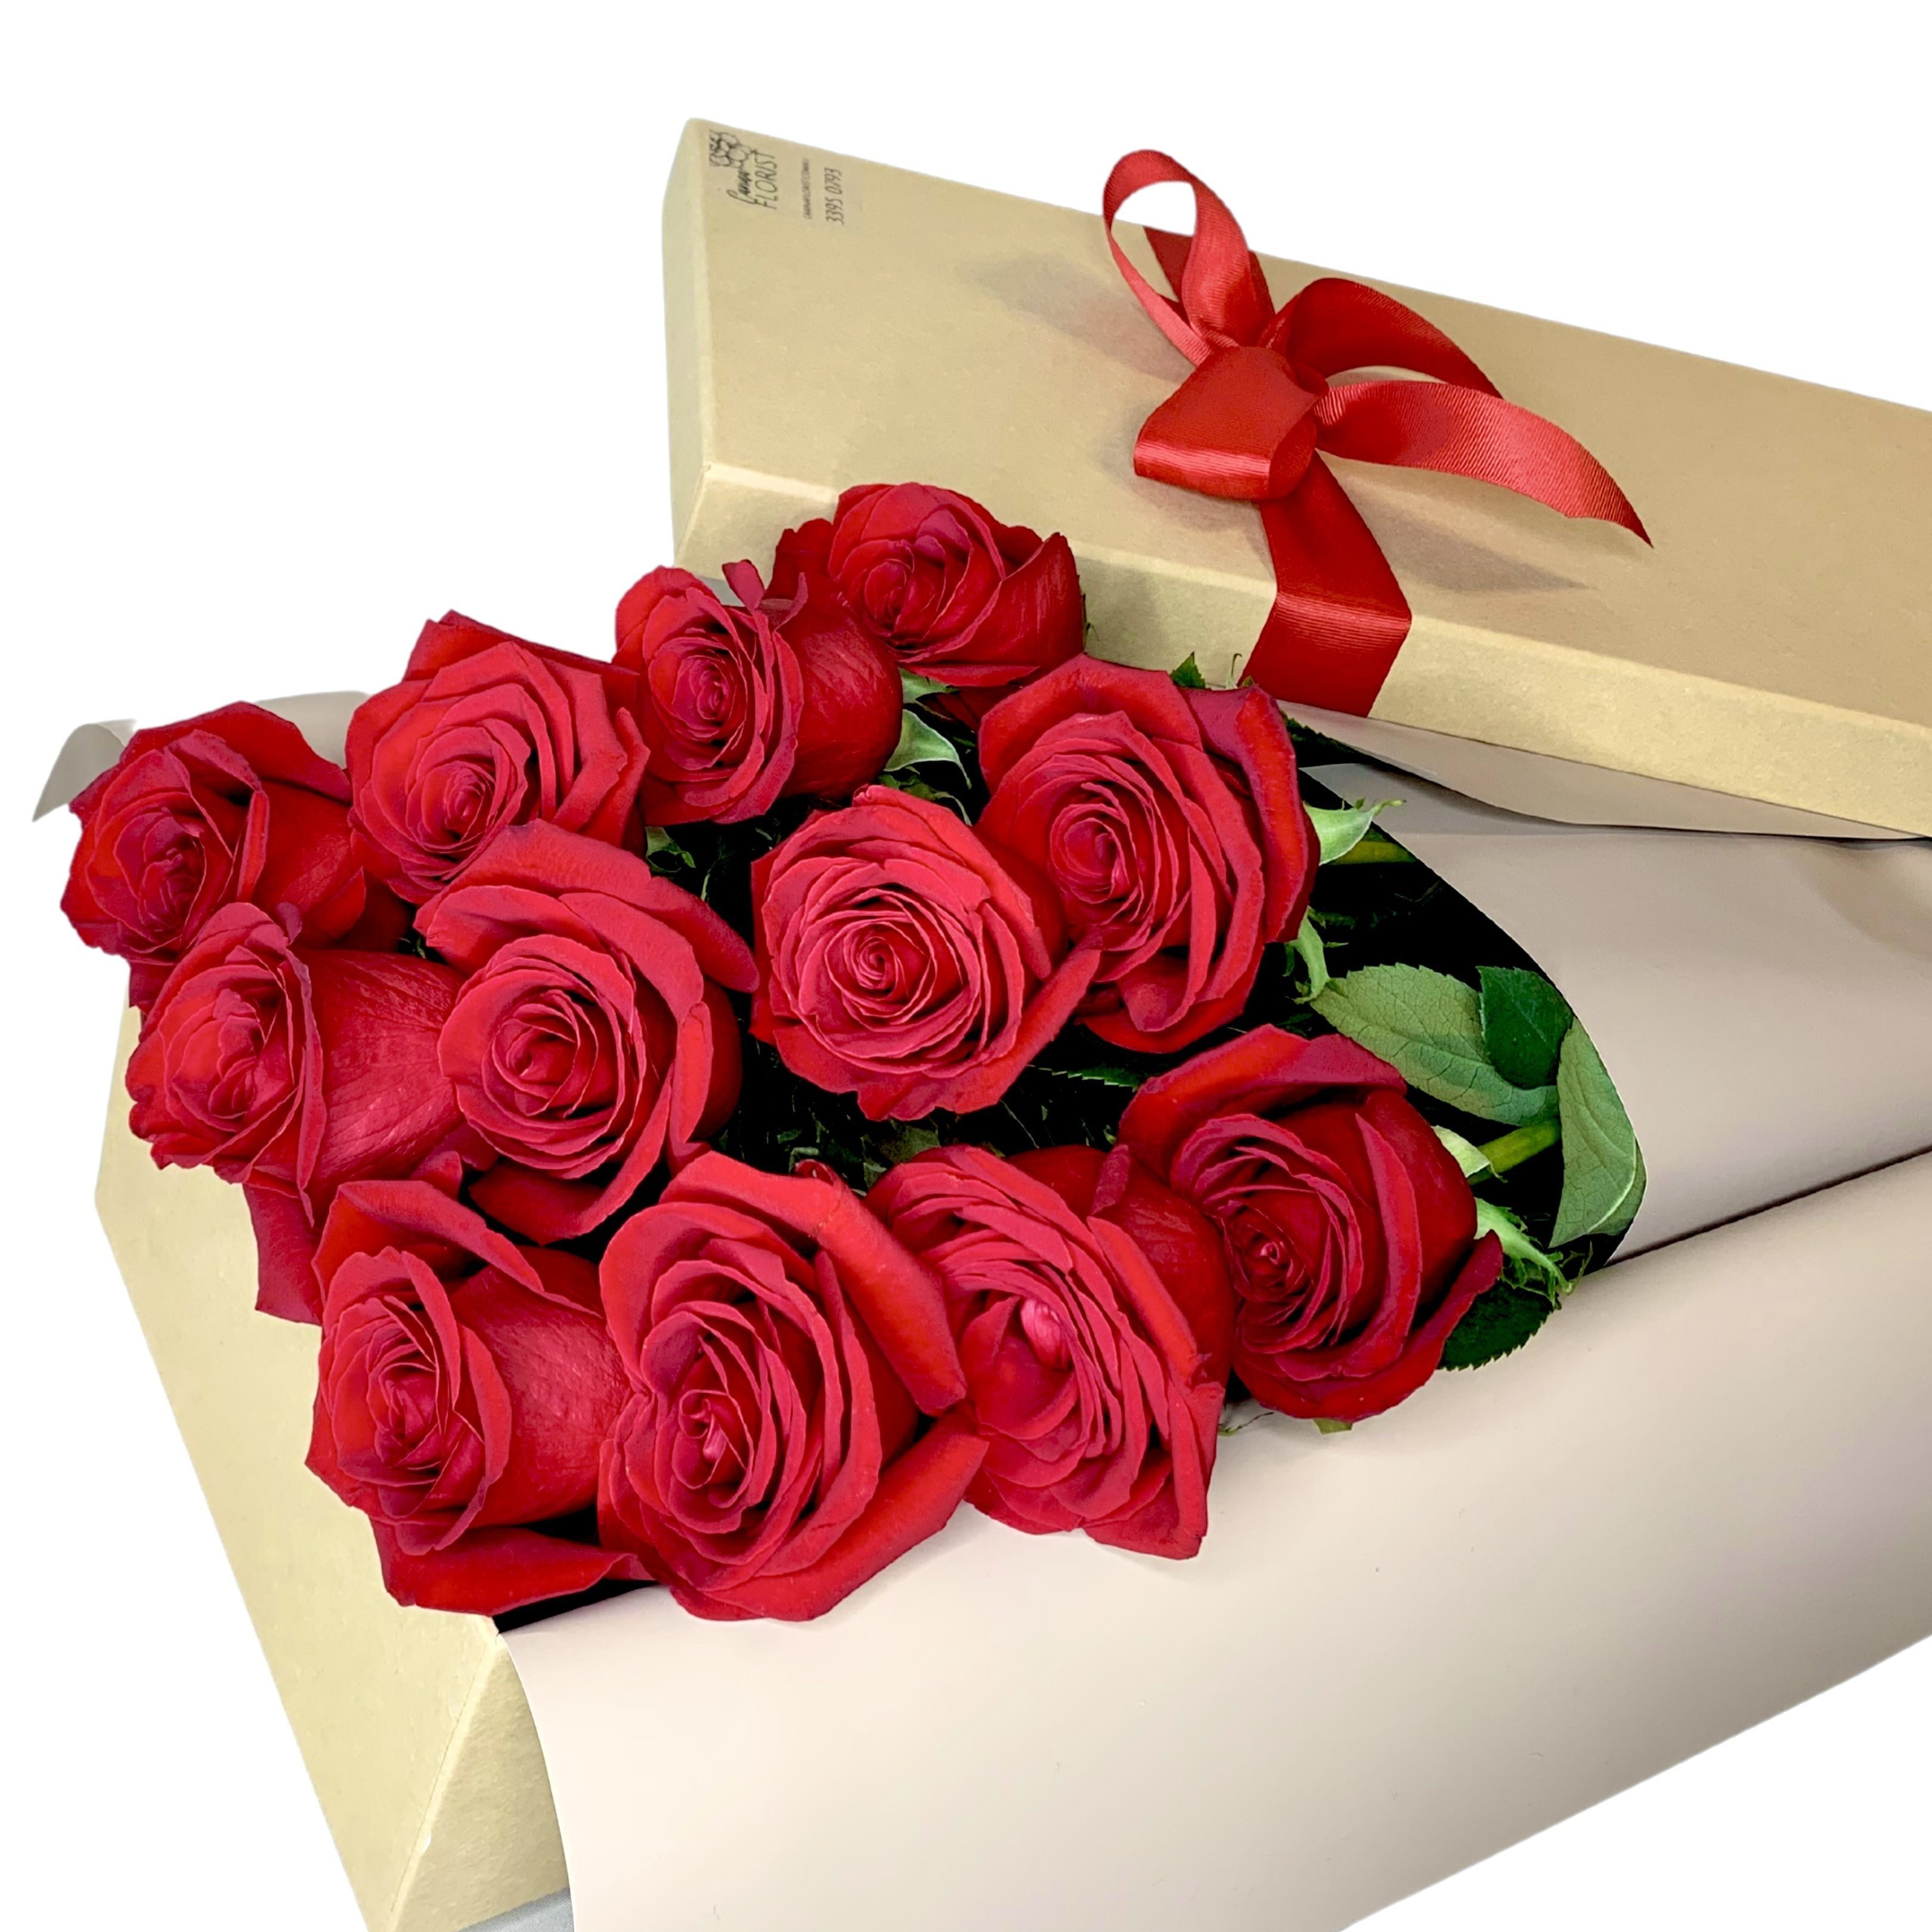 Roses in a Presentation Box